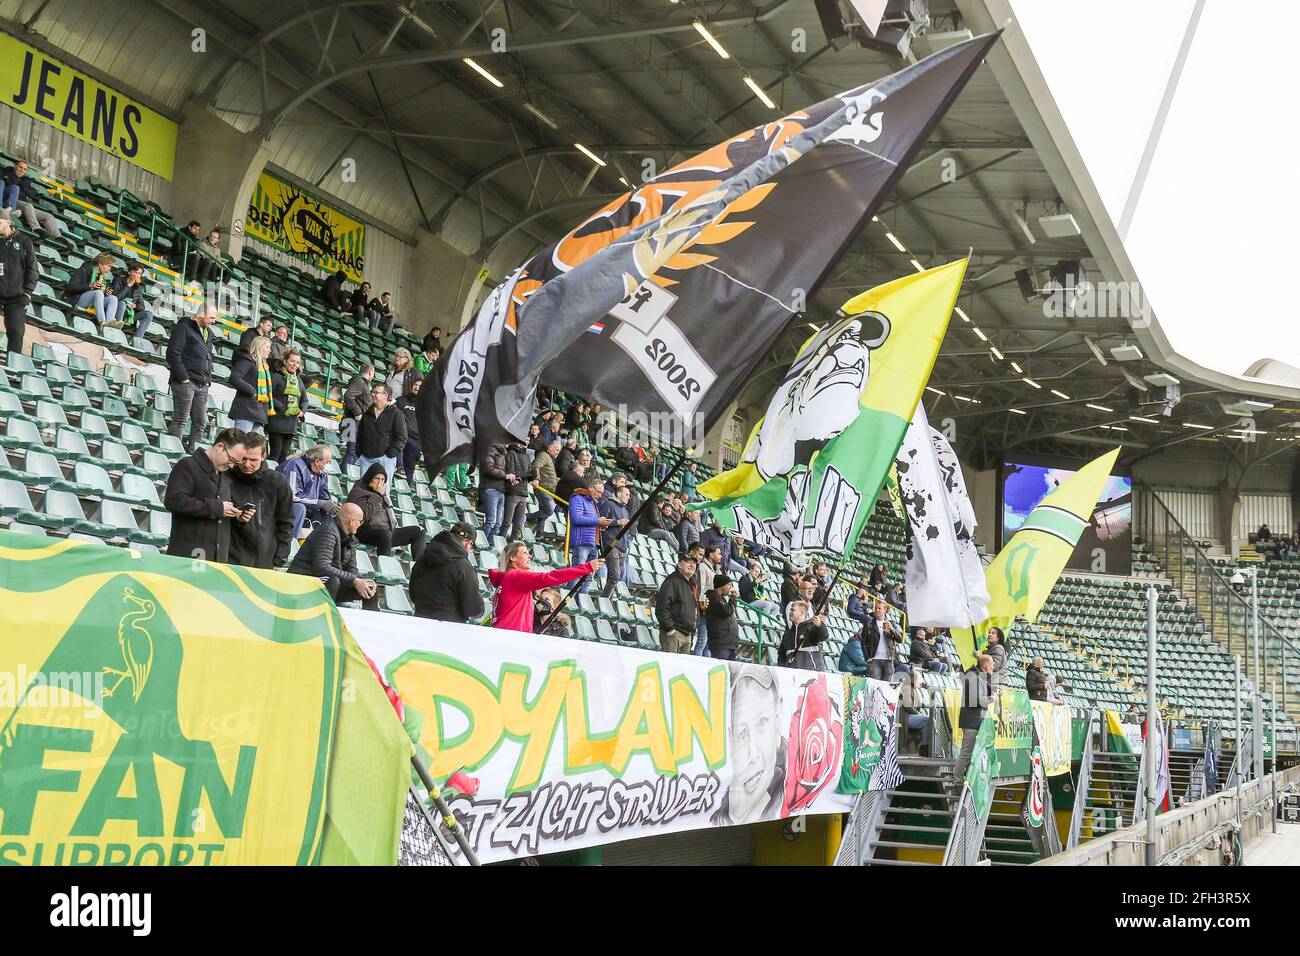 Modernisere Fritid bestikke The Hague, Netherlands. April 25 2021: Flags of supporters in ADO Den Haag  stadium during the Dutch Eredivisie match between ADO Den Haag and Fortuna  Sittard at Cars Jeans Stadion on April